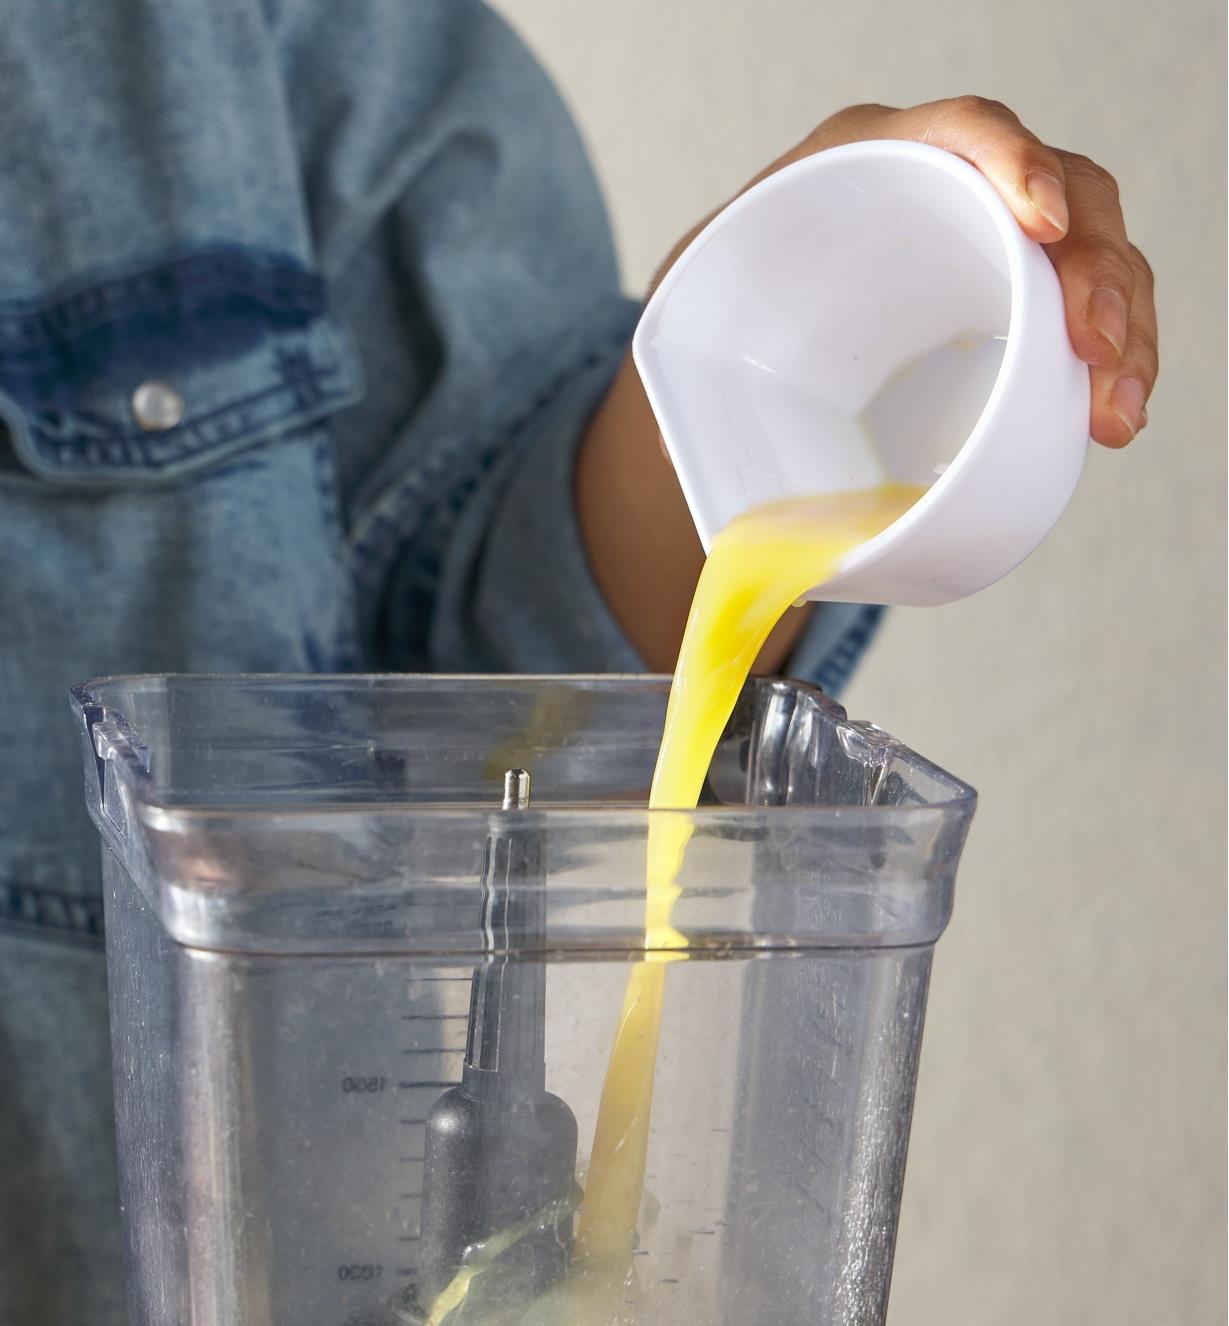 Using one of the corners of the scoop measuring bowl as a spout to pour liquid